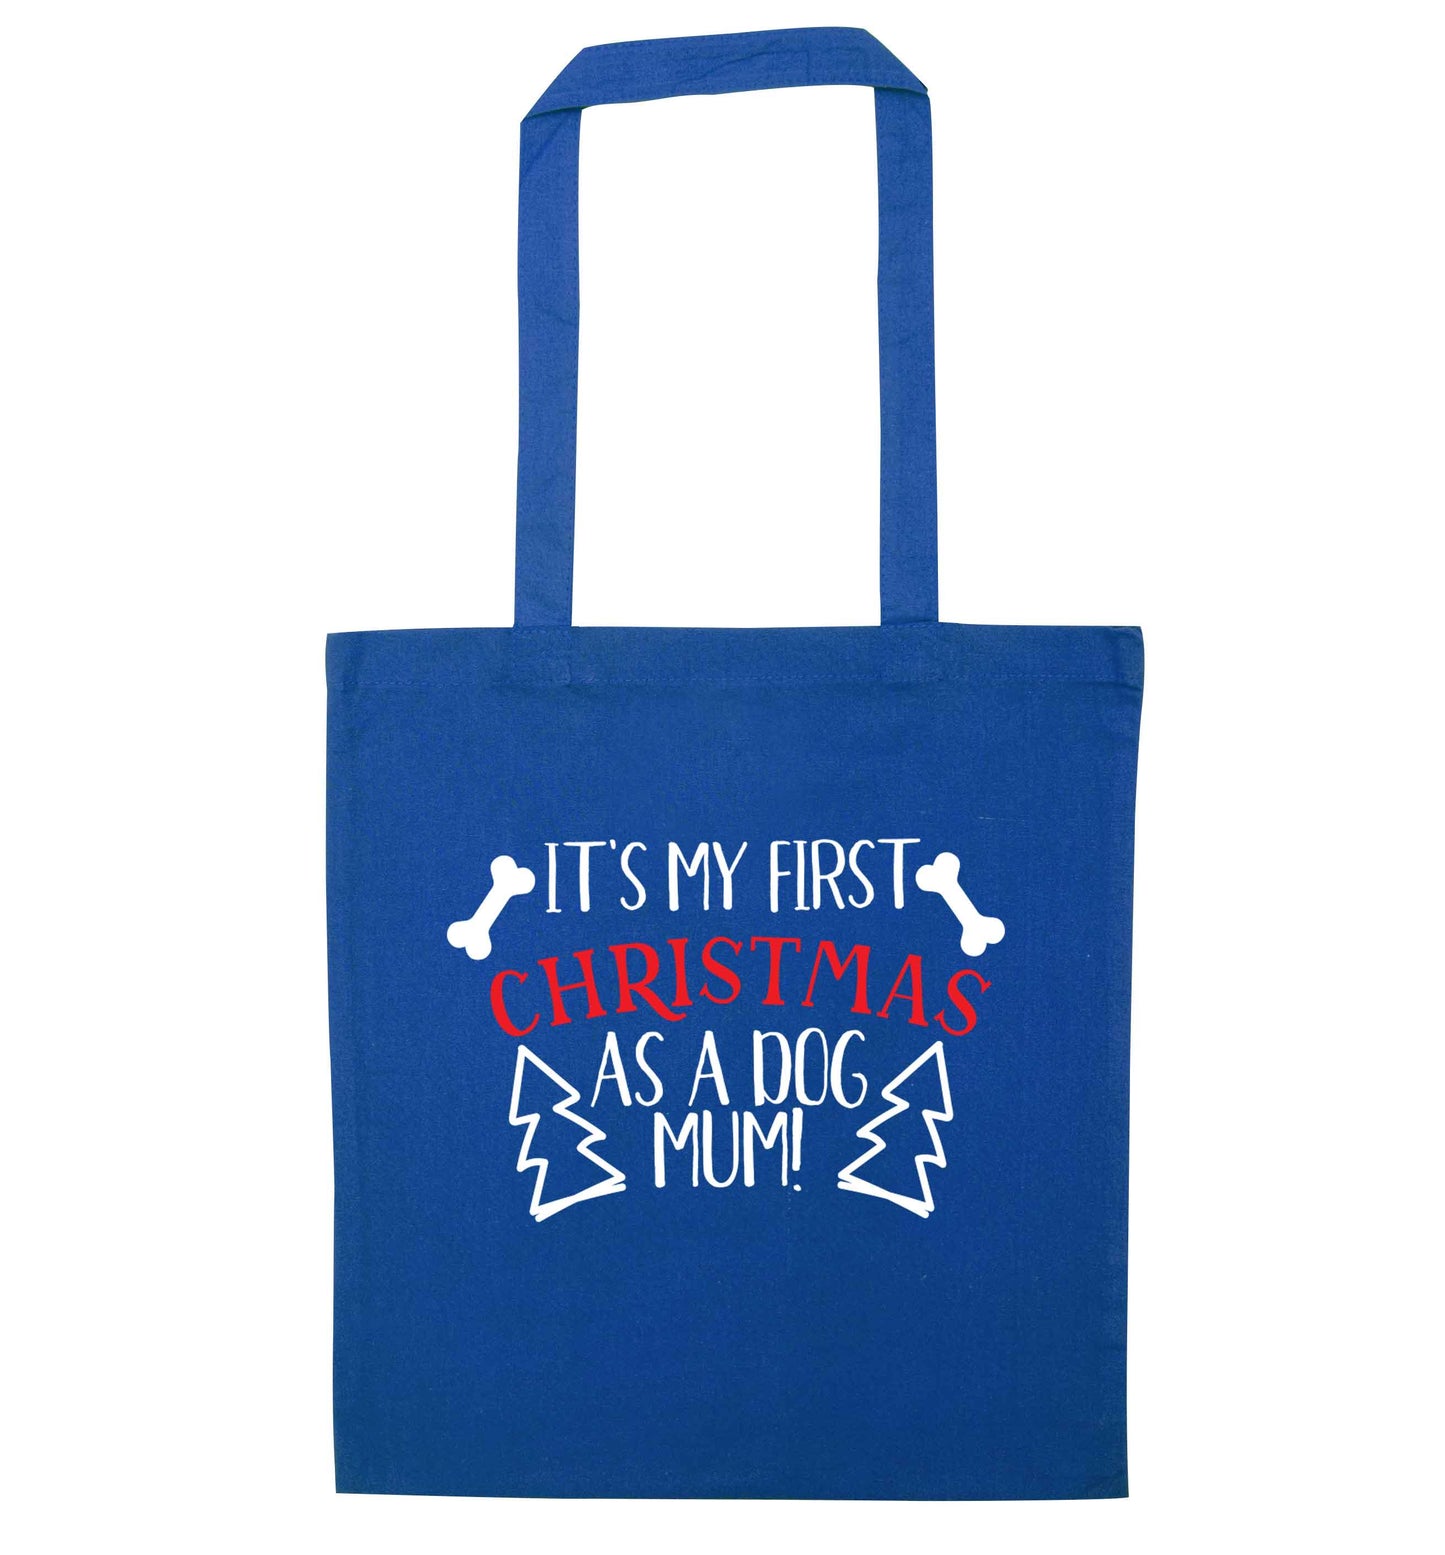 It's my first Christmas as a dog mum! blue tote bag